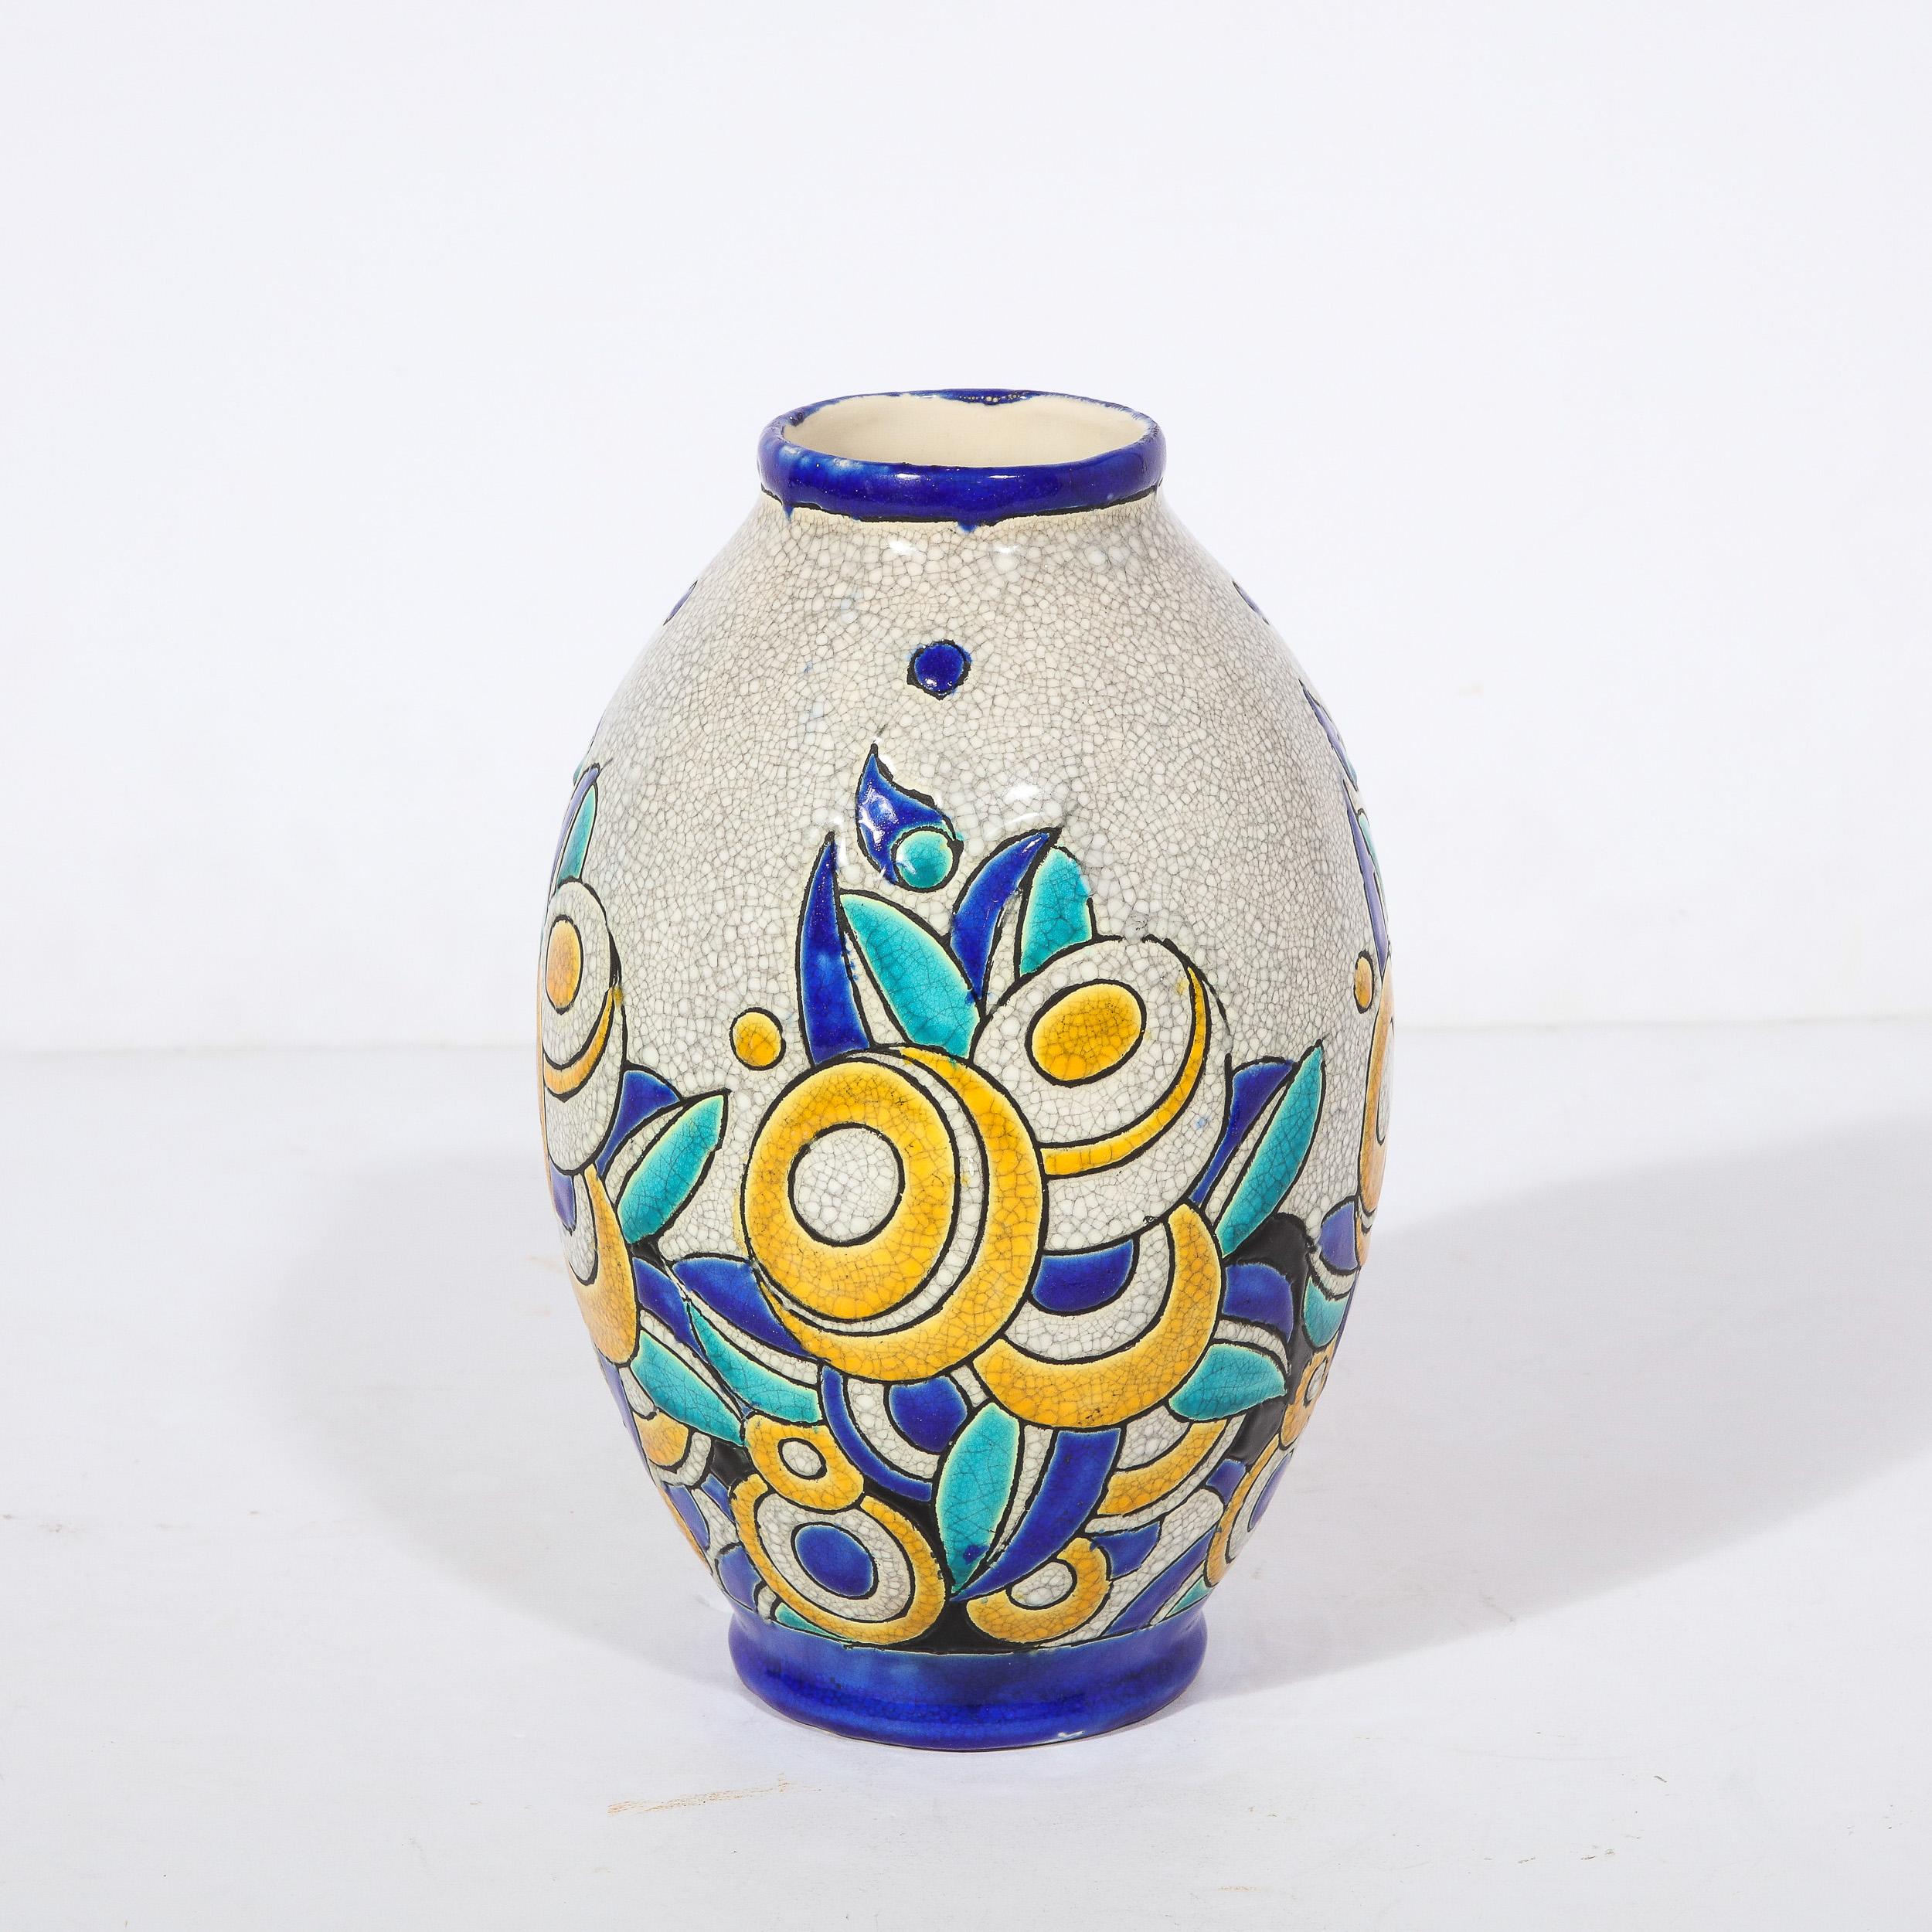 Art Deco Cubic Floral Ceramic Vase by Charles Catteau for Boch Freres Keramis For Sale 1